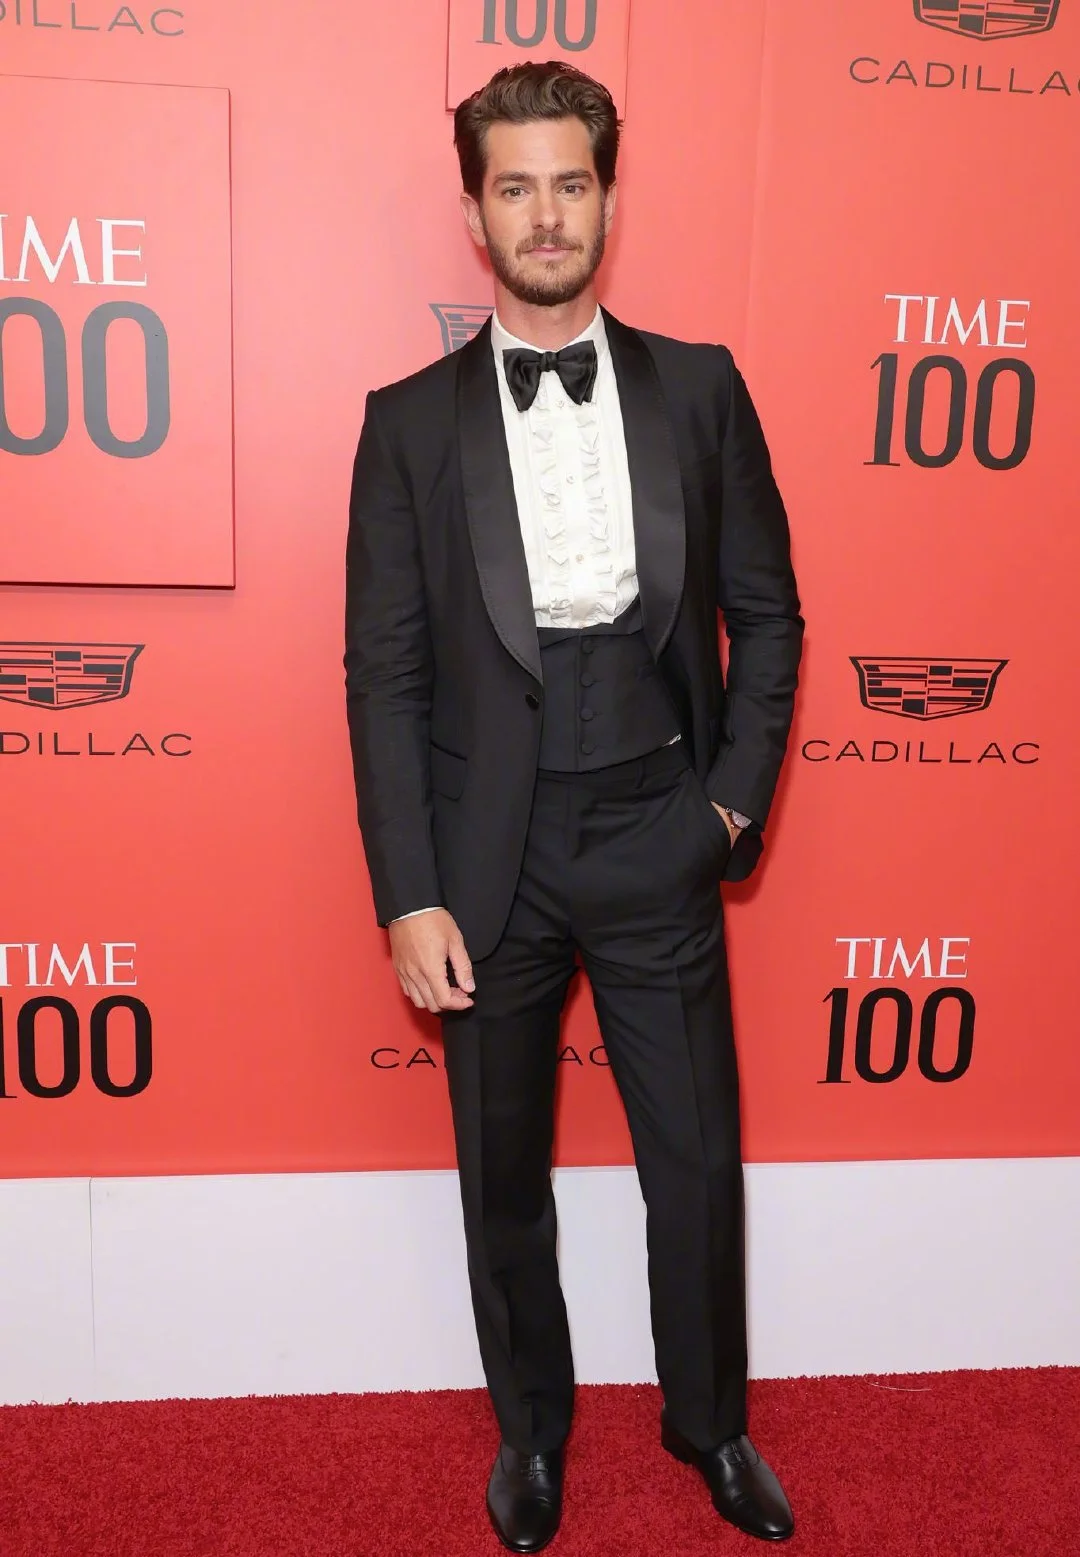 Andrew Garfield Featured in Time's "Top 100 Influencers" Celebration